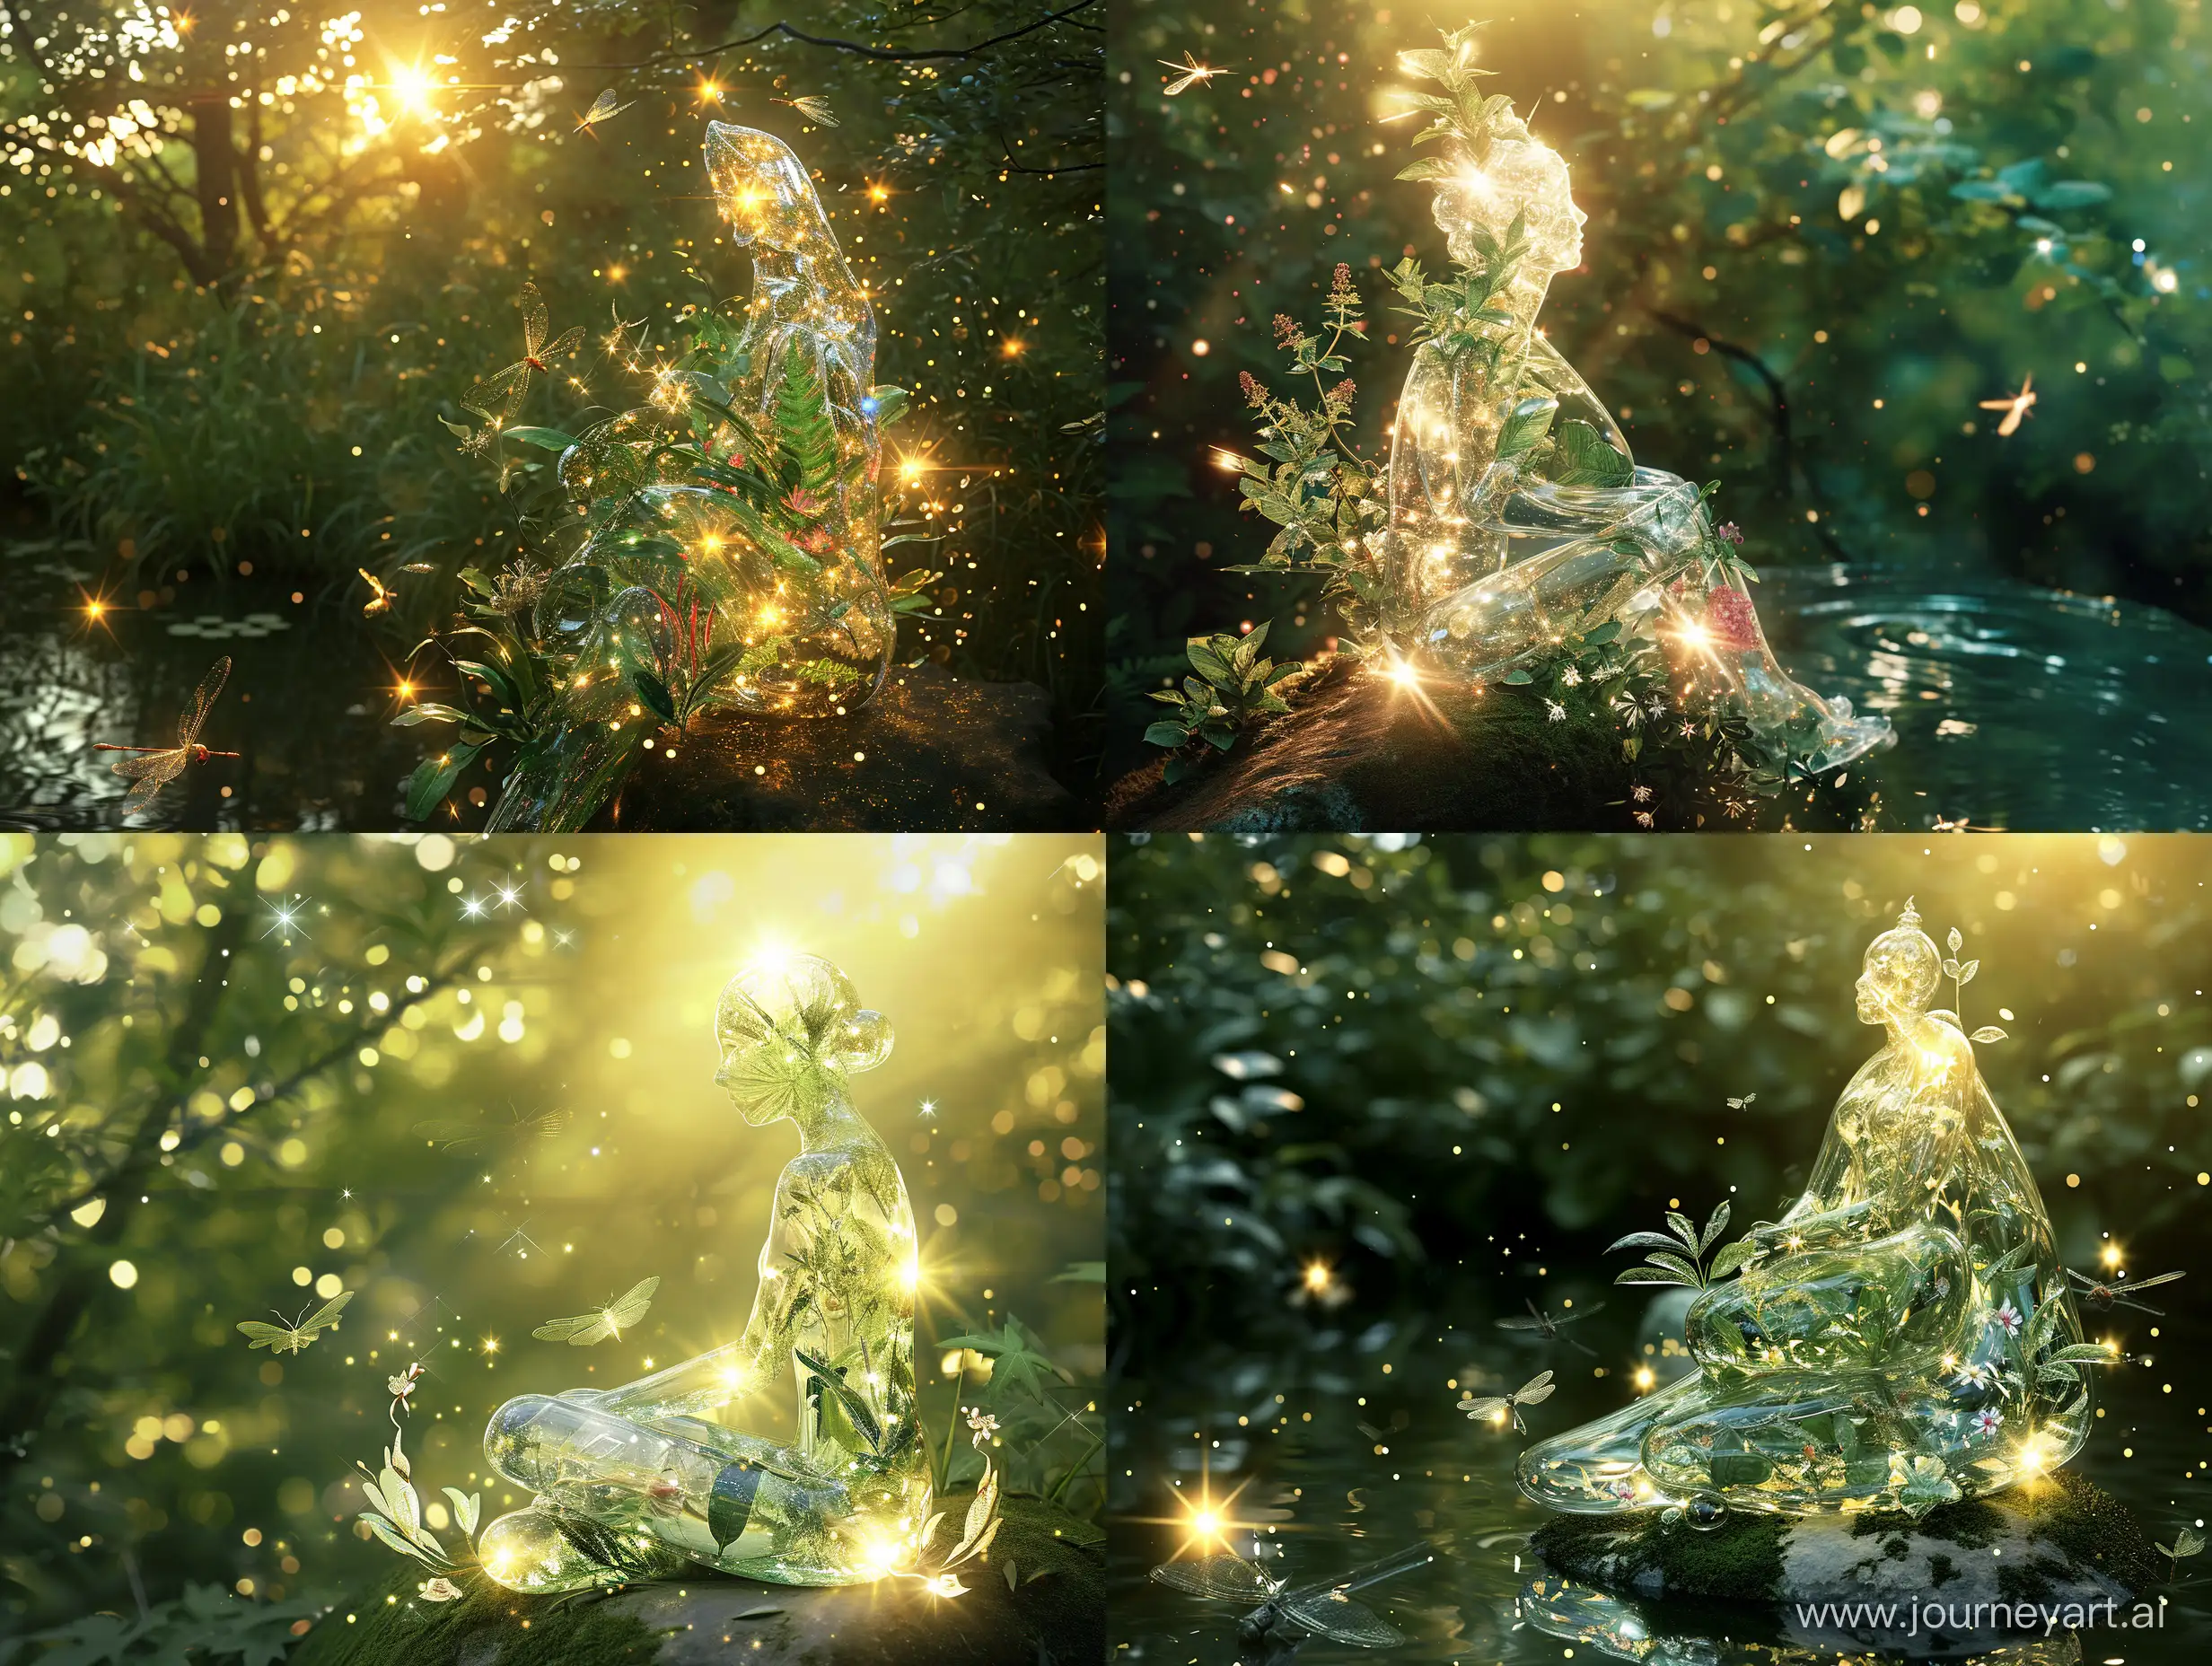 Enchanting-Glass-Nymph-Amidst-Lush-Forest-Kaleidoscope